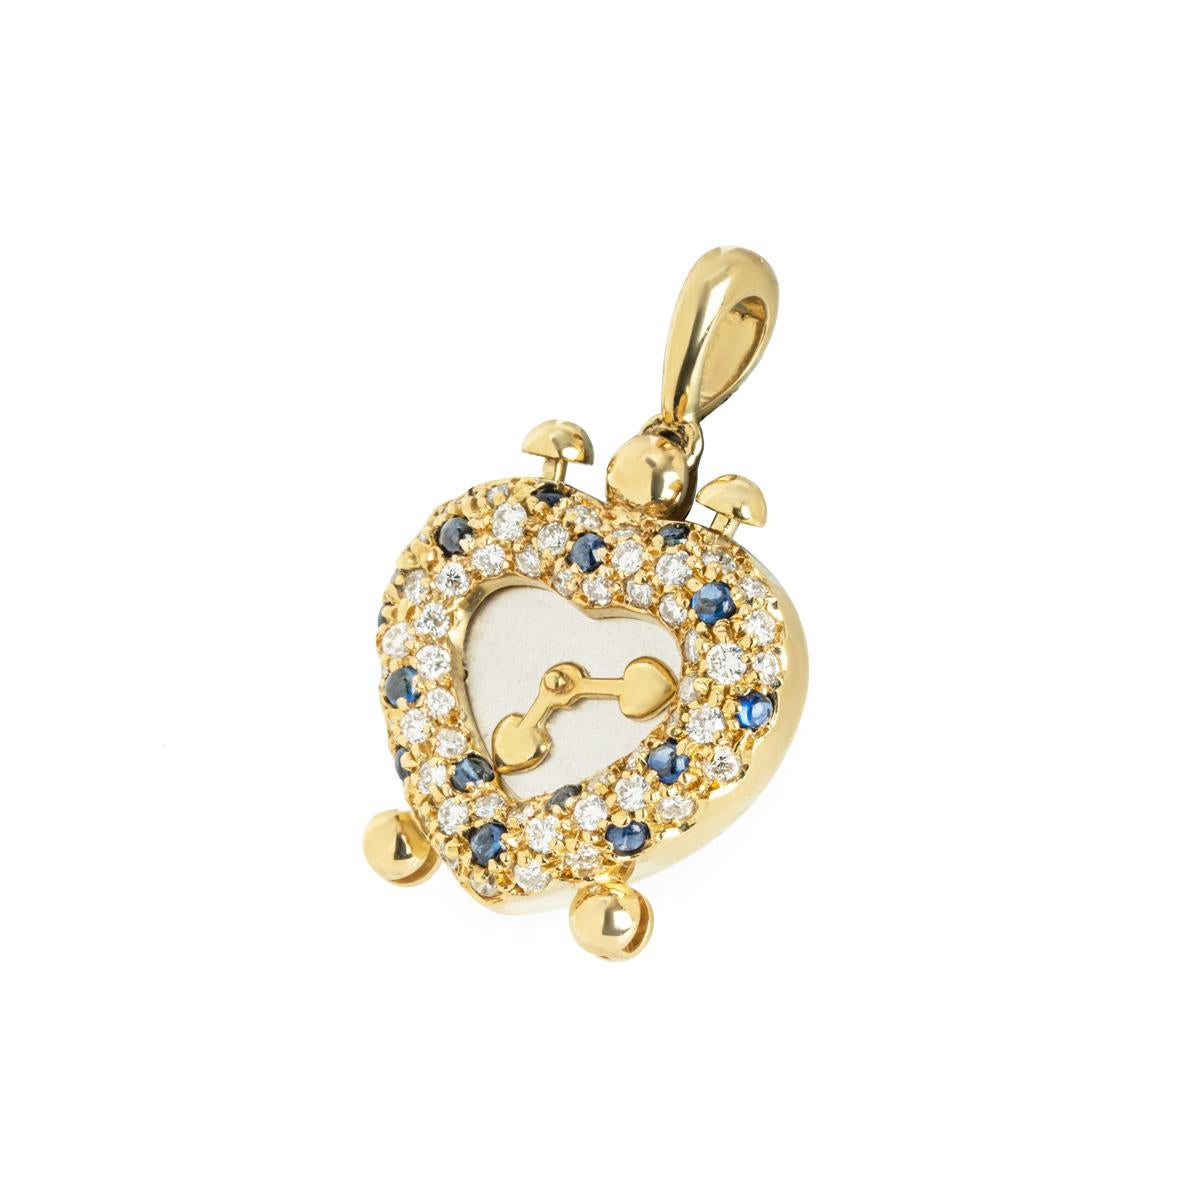 An 18k yellow gold diamond and sapphire heart clock pendant. The pendant comprises of a heart clock motif consisting of round brilliant cut diamonds and sapphires in a pave setting alternating around the outer edge with a silver centre with gold